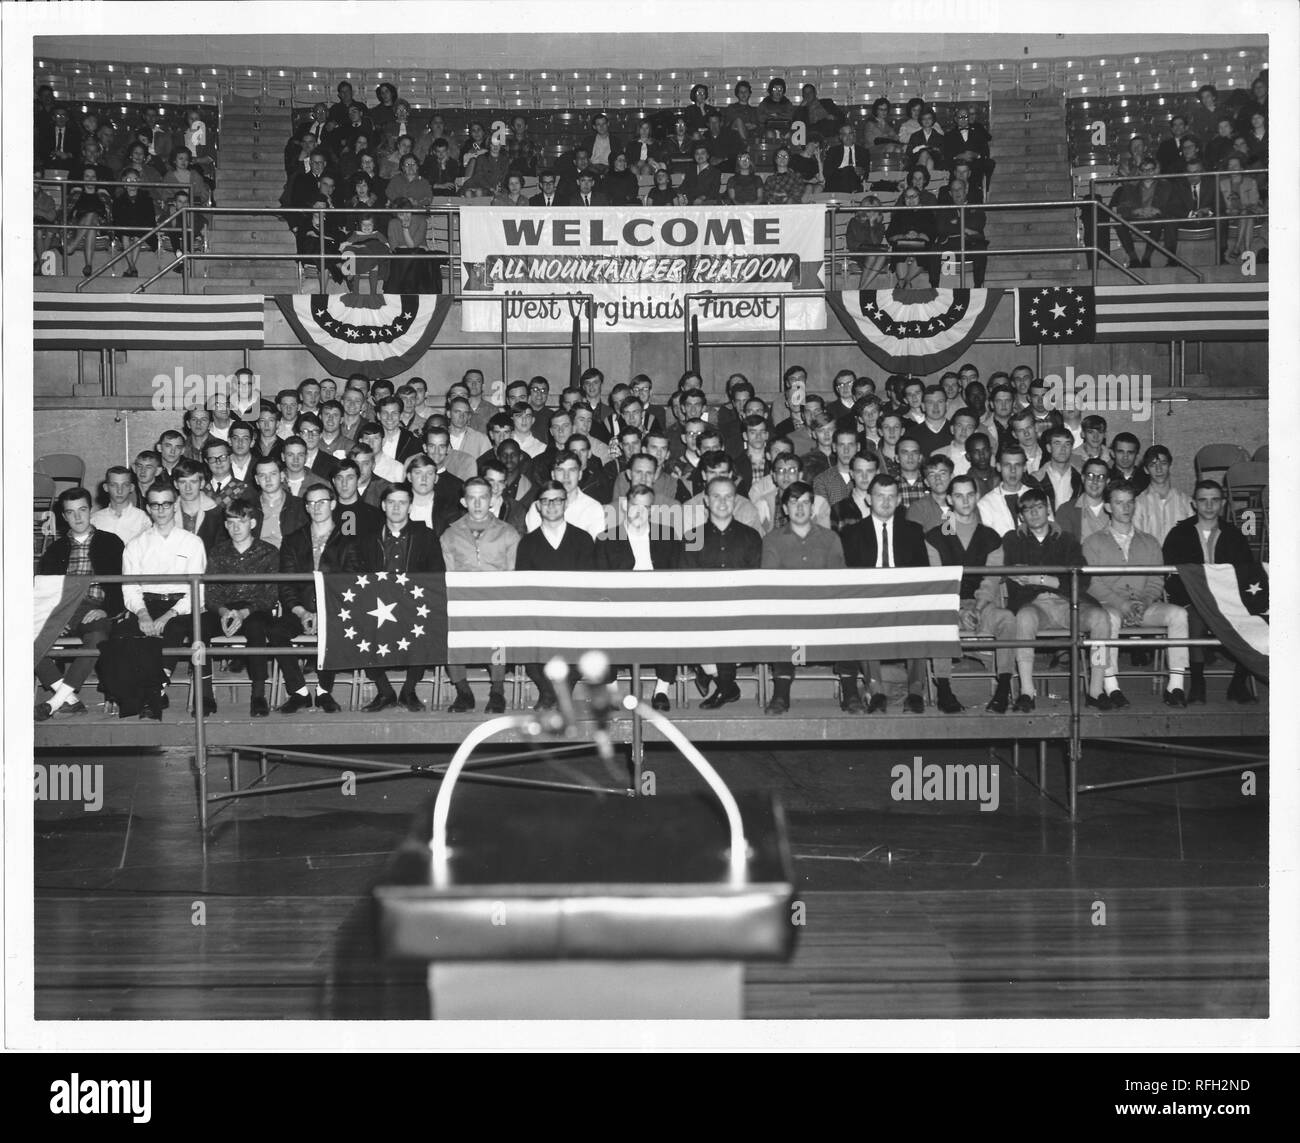 Black and white photograph of a group of young men, likely US military recruits, wearing civilian clothing, seated together on bleachers or stands in an auditorium, with older men and women seated in the upper risers, and a large sign in the background with the text 'Welcome, All Mountaineer Platoon, West Virginia's Finest, ' with a microphone visible on a podium in the foreground, photographed during the Vietnam War, 1967. () Stock Photo